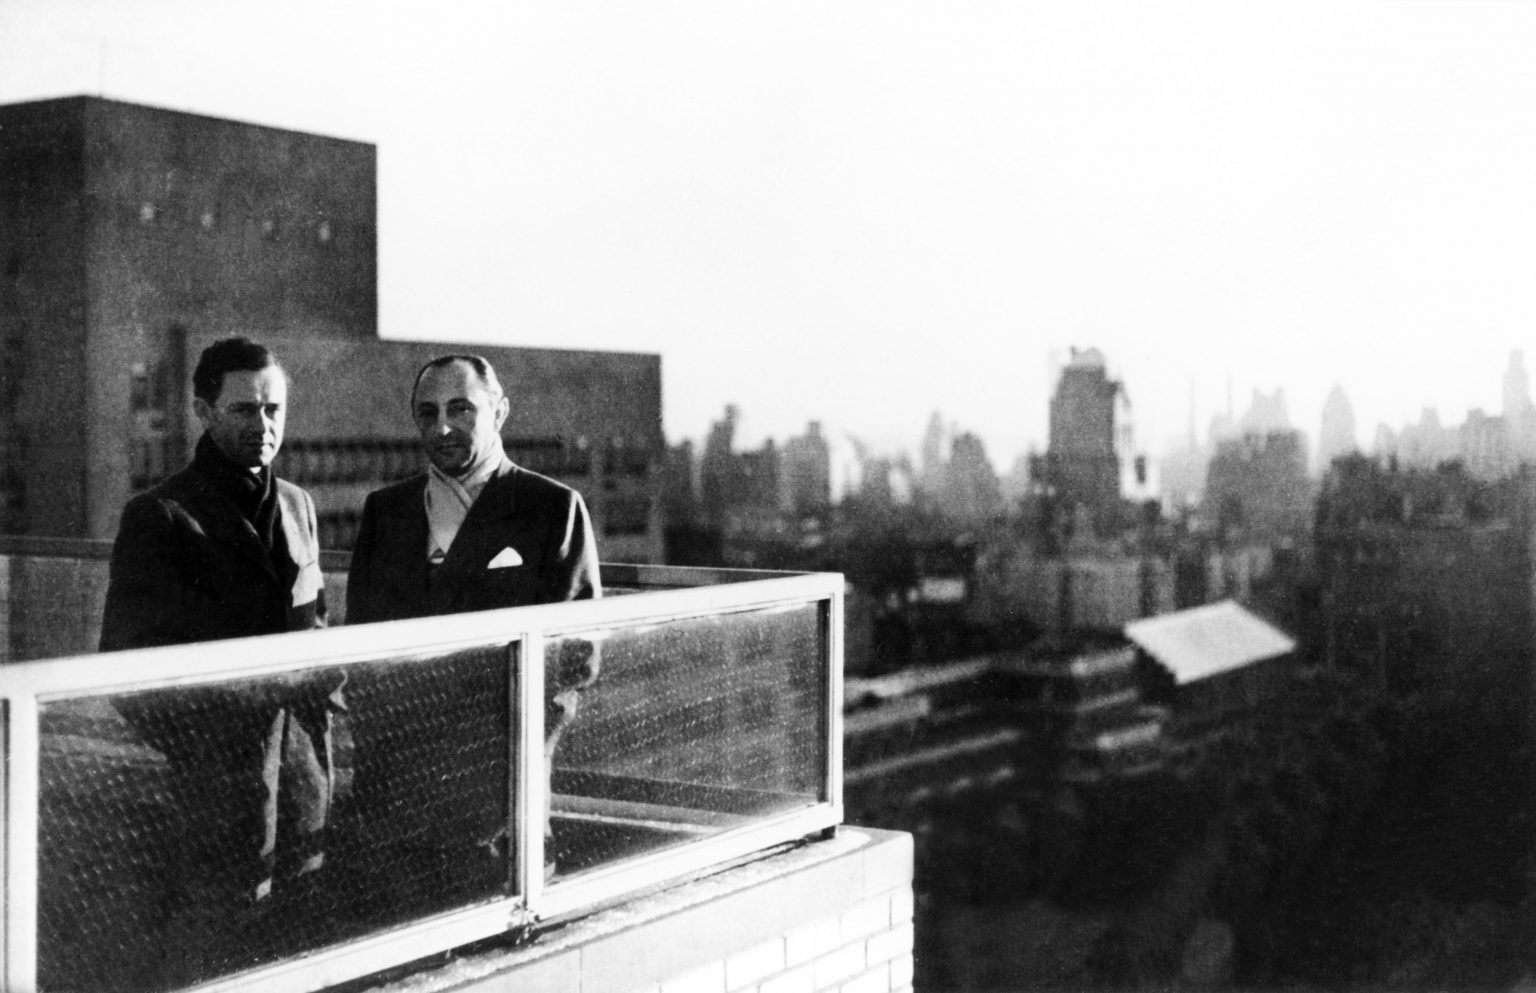 Ferry Porsche (left) and Max Hoffman in December 1951 on the terrace of Hoffman's apartment on Park Avenue, New York